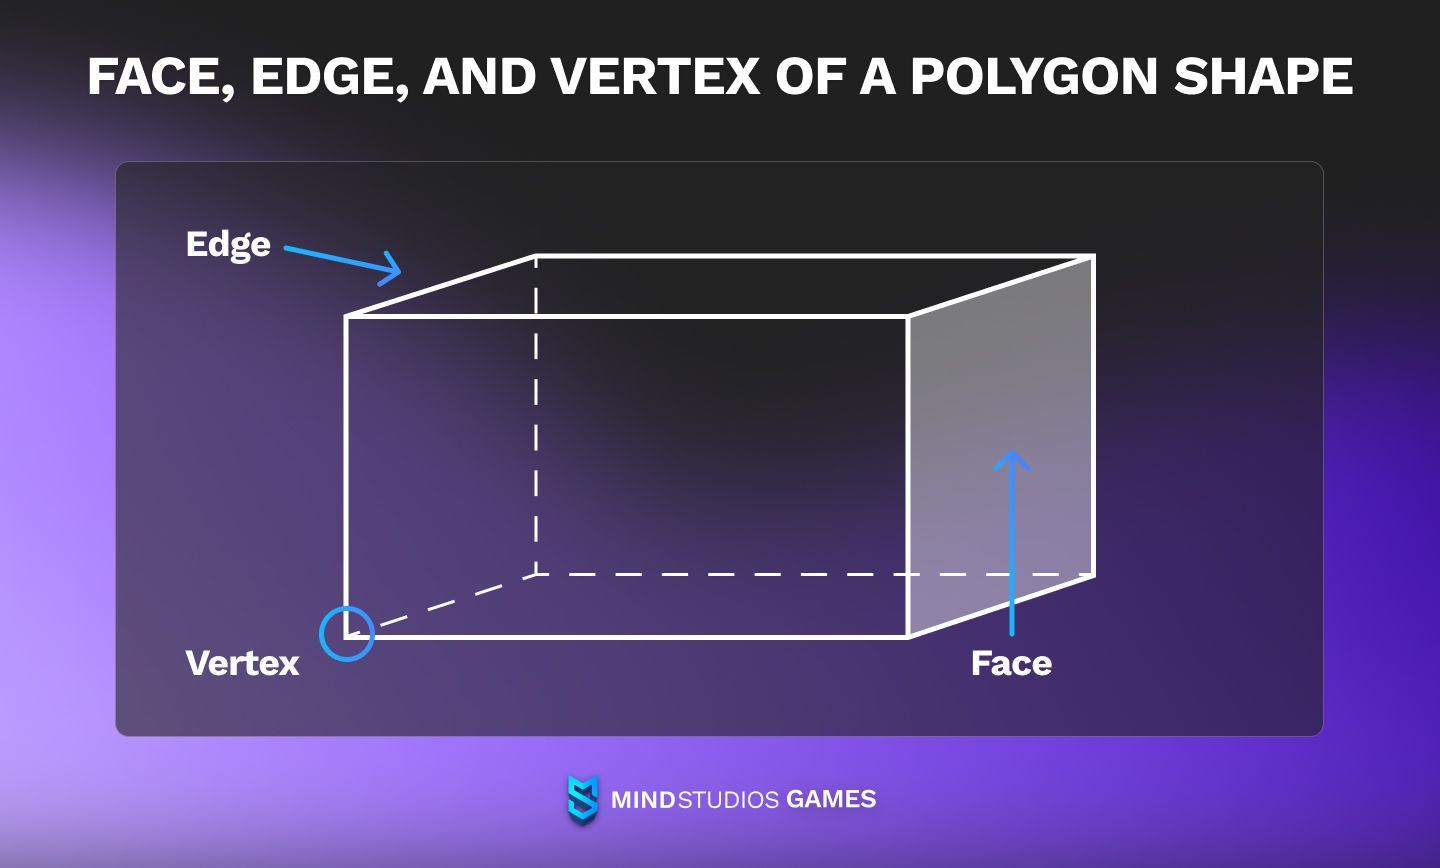 Face, edge, and vertex of a polygon shape.